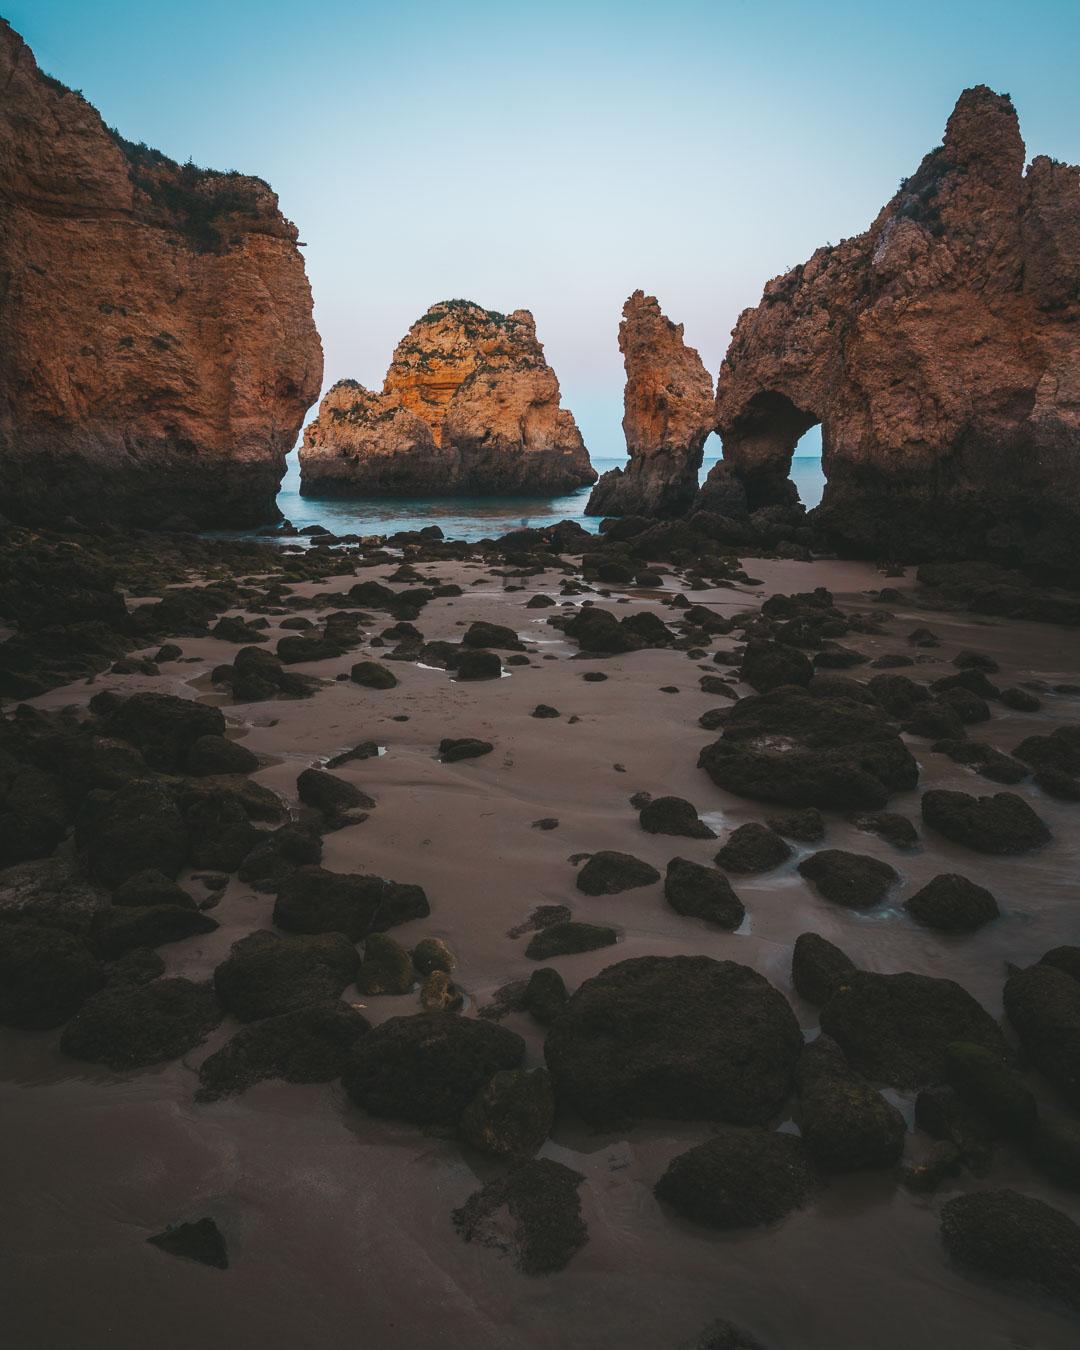 ponta da piedade is in the list of the famous landmarks portugal has to offer